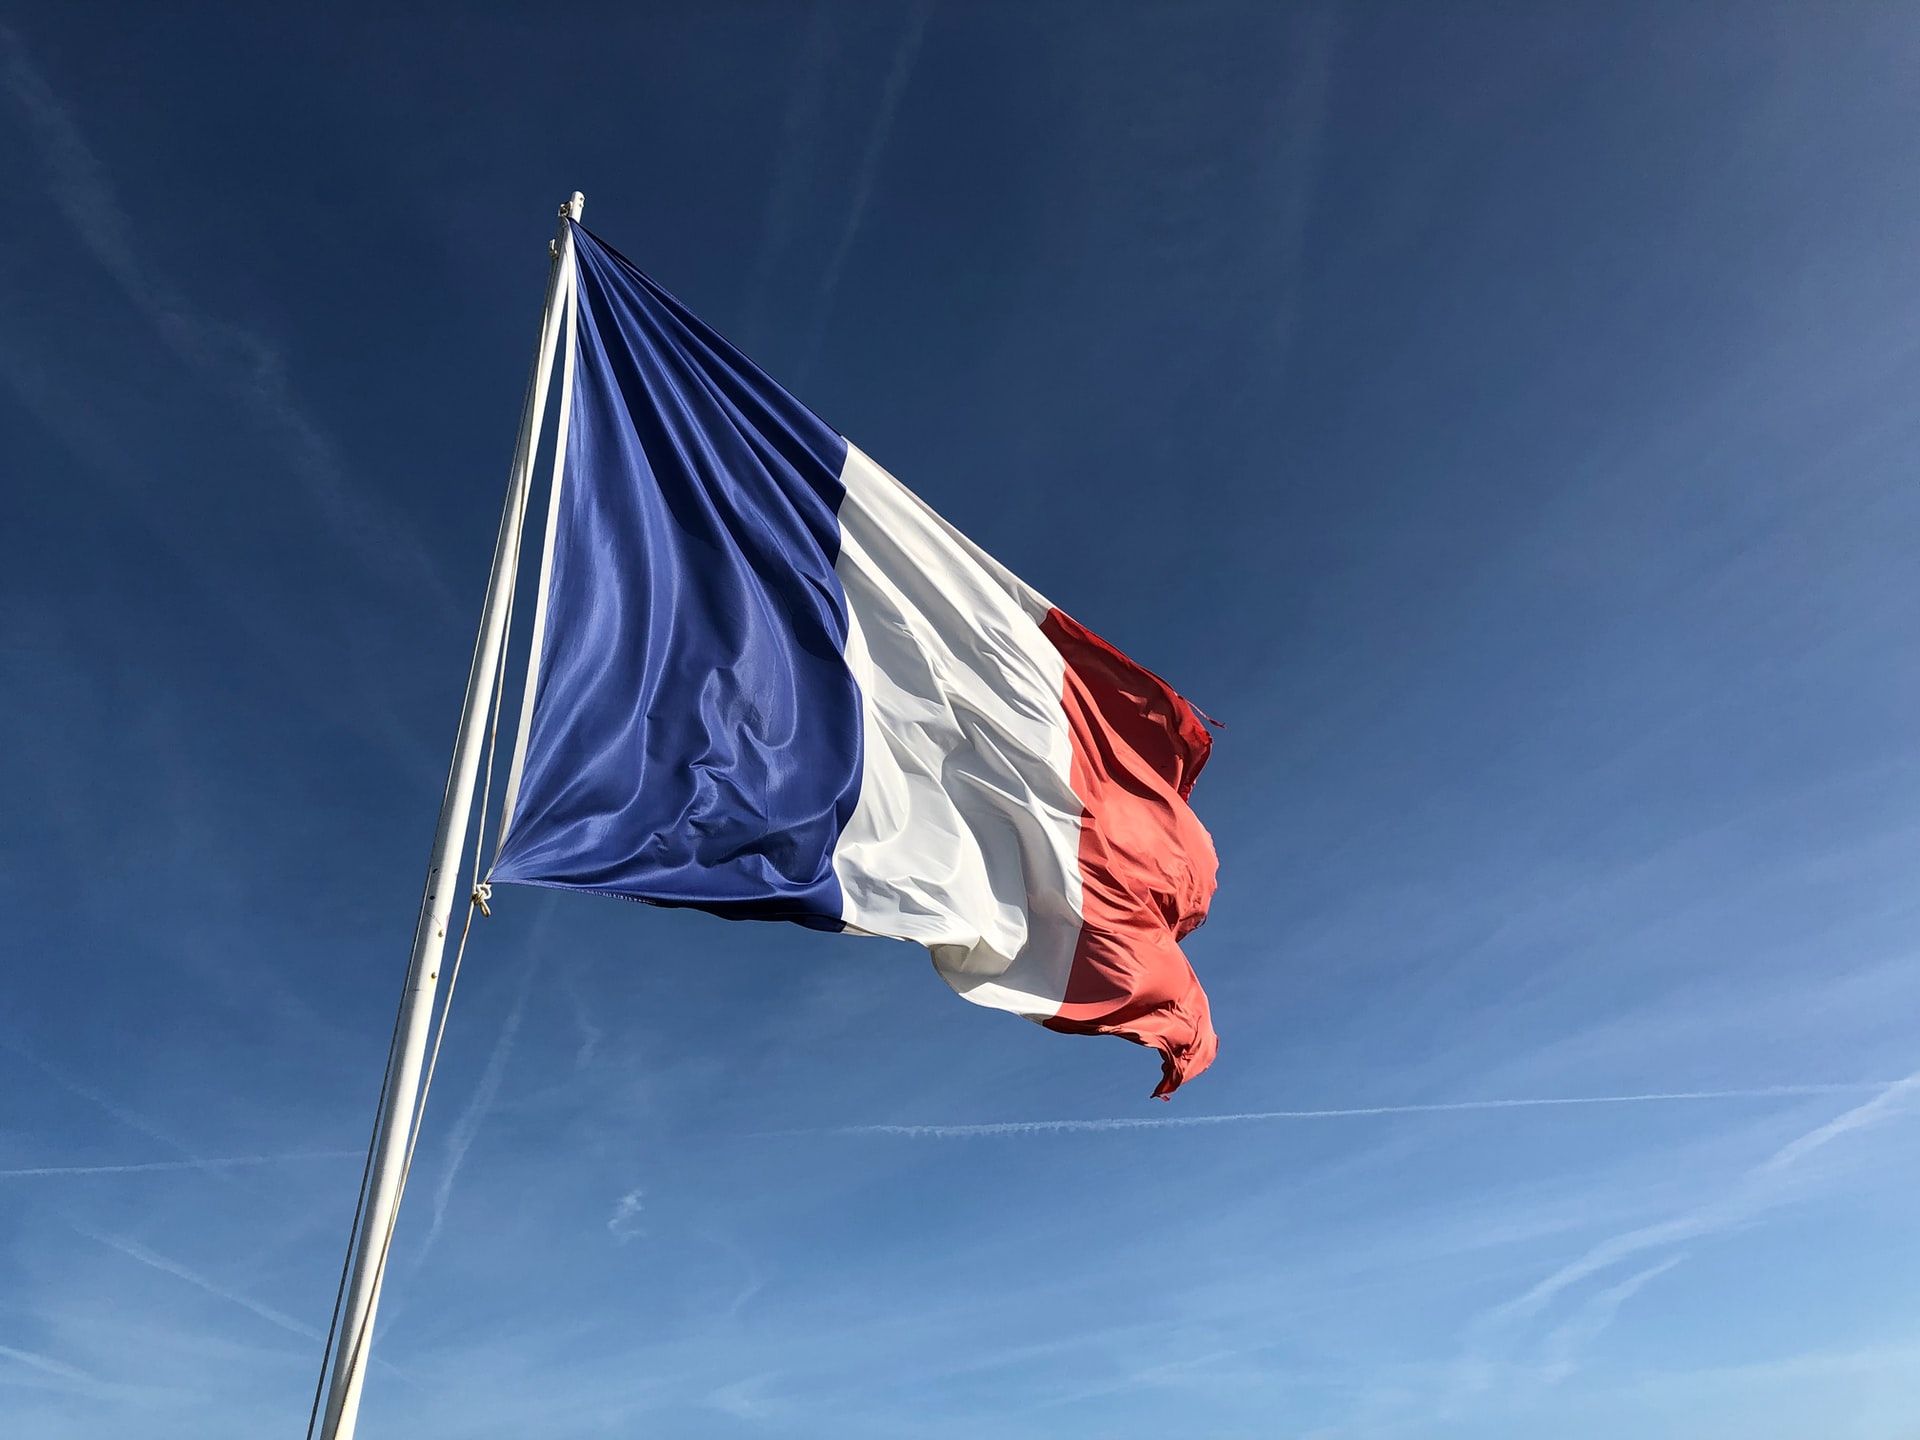 Happy National Day France!